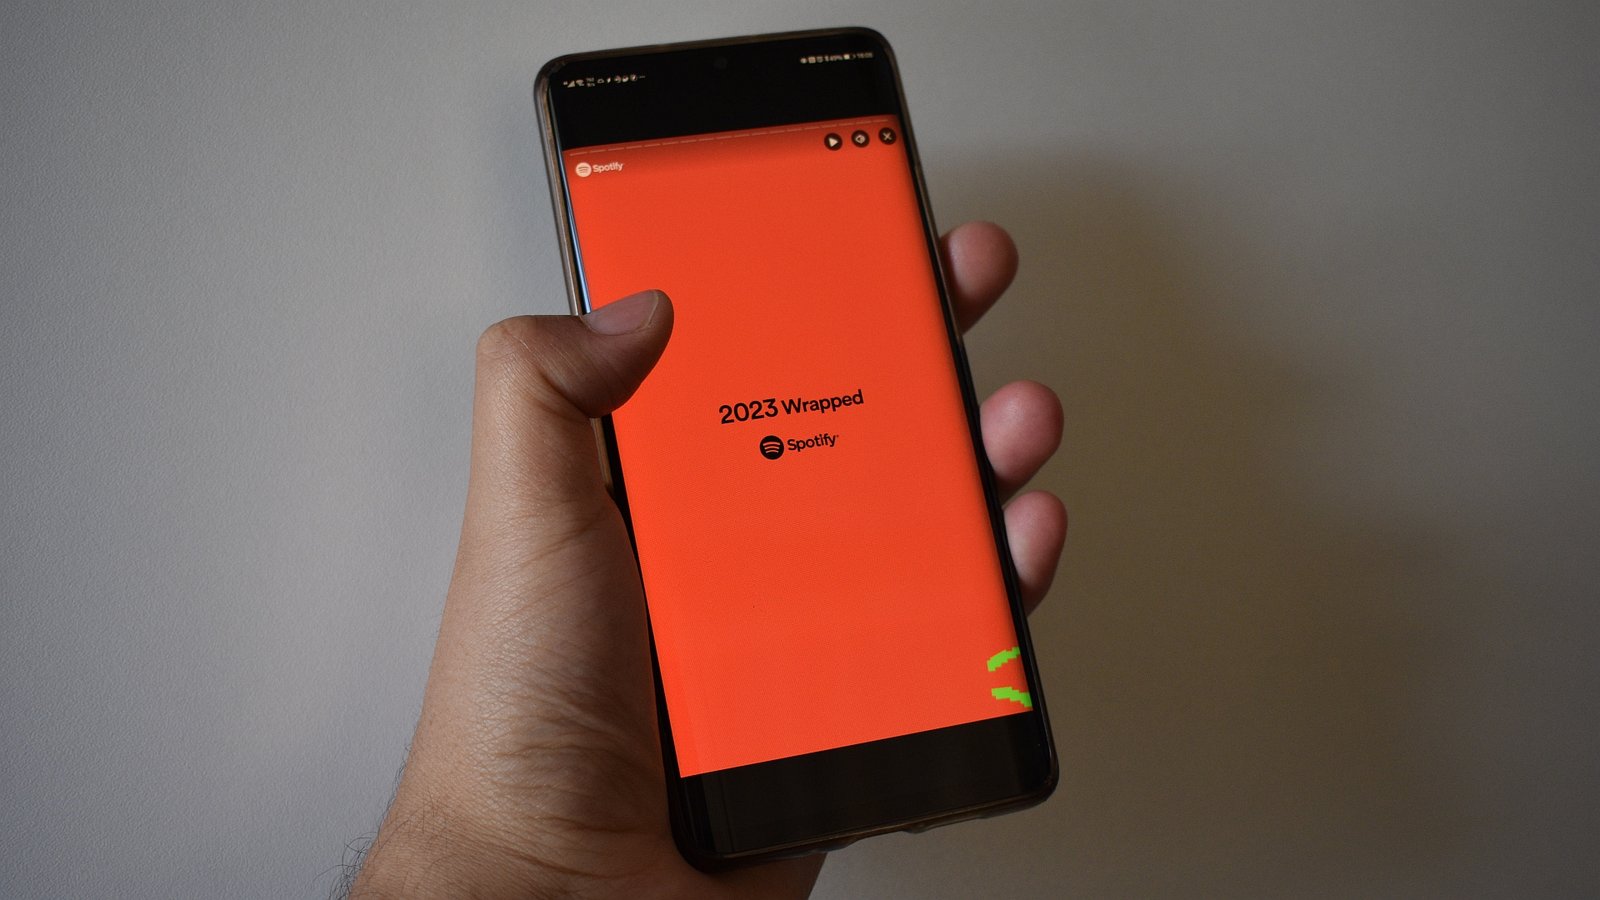 Spotify Wrapped not showing up? Here’s how to fix it